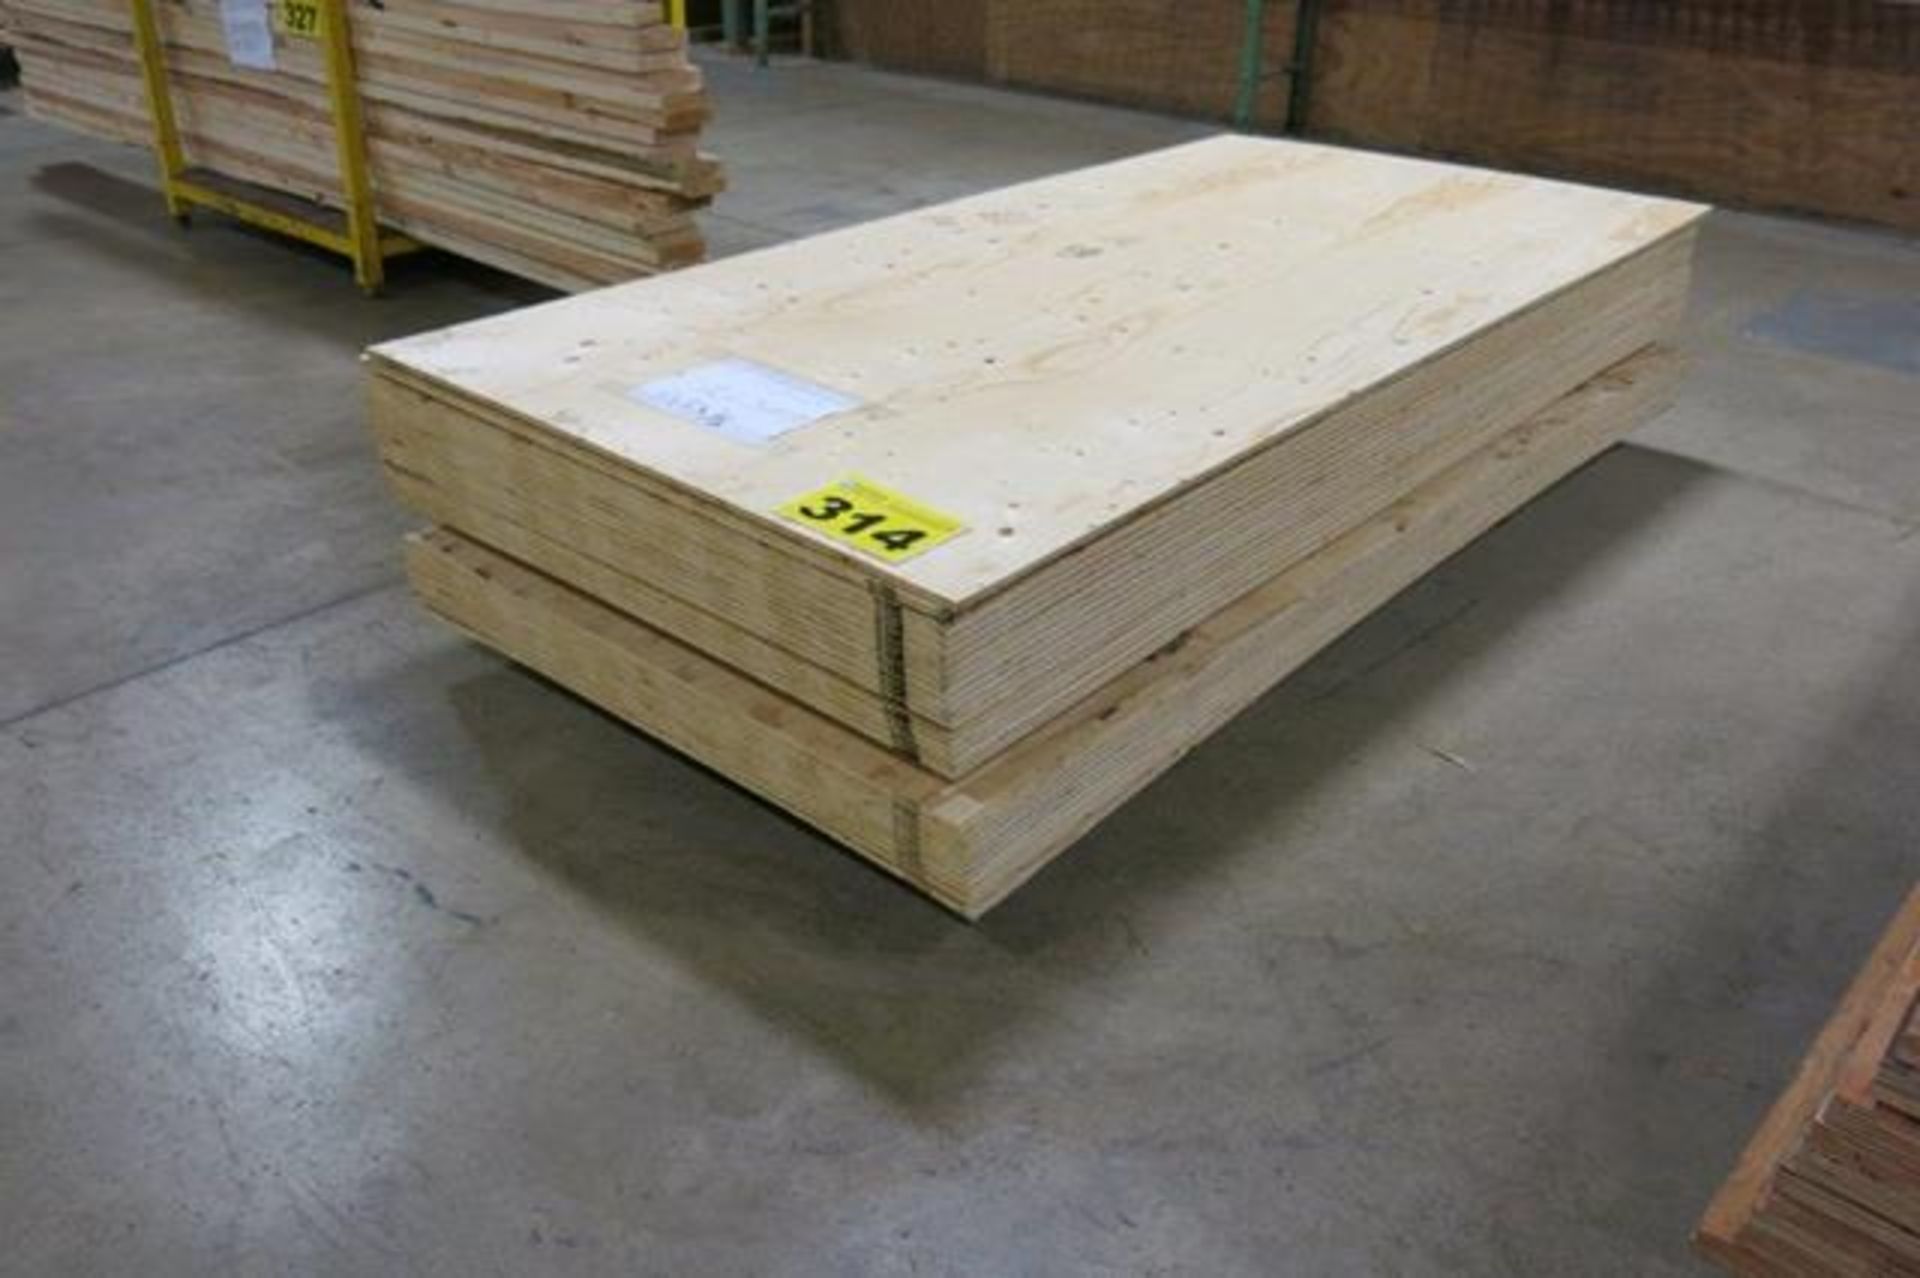 LOT OF 26 SHEETS (APPROX.) OF 4' X 8' X 1/2", PLYWOOD